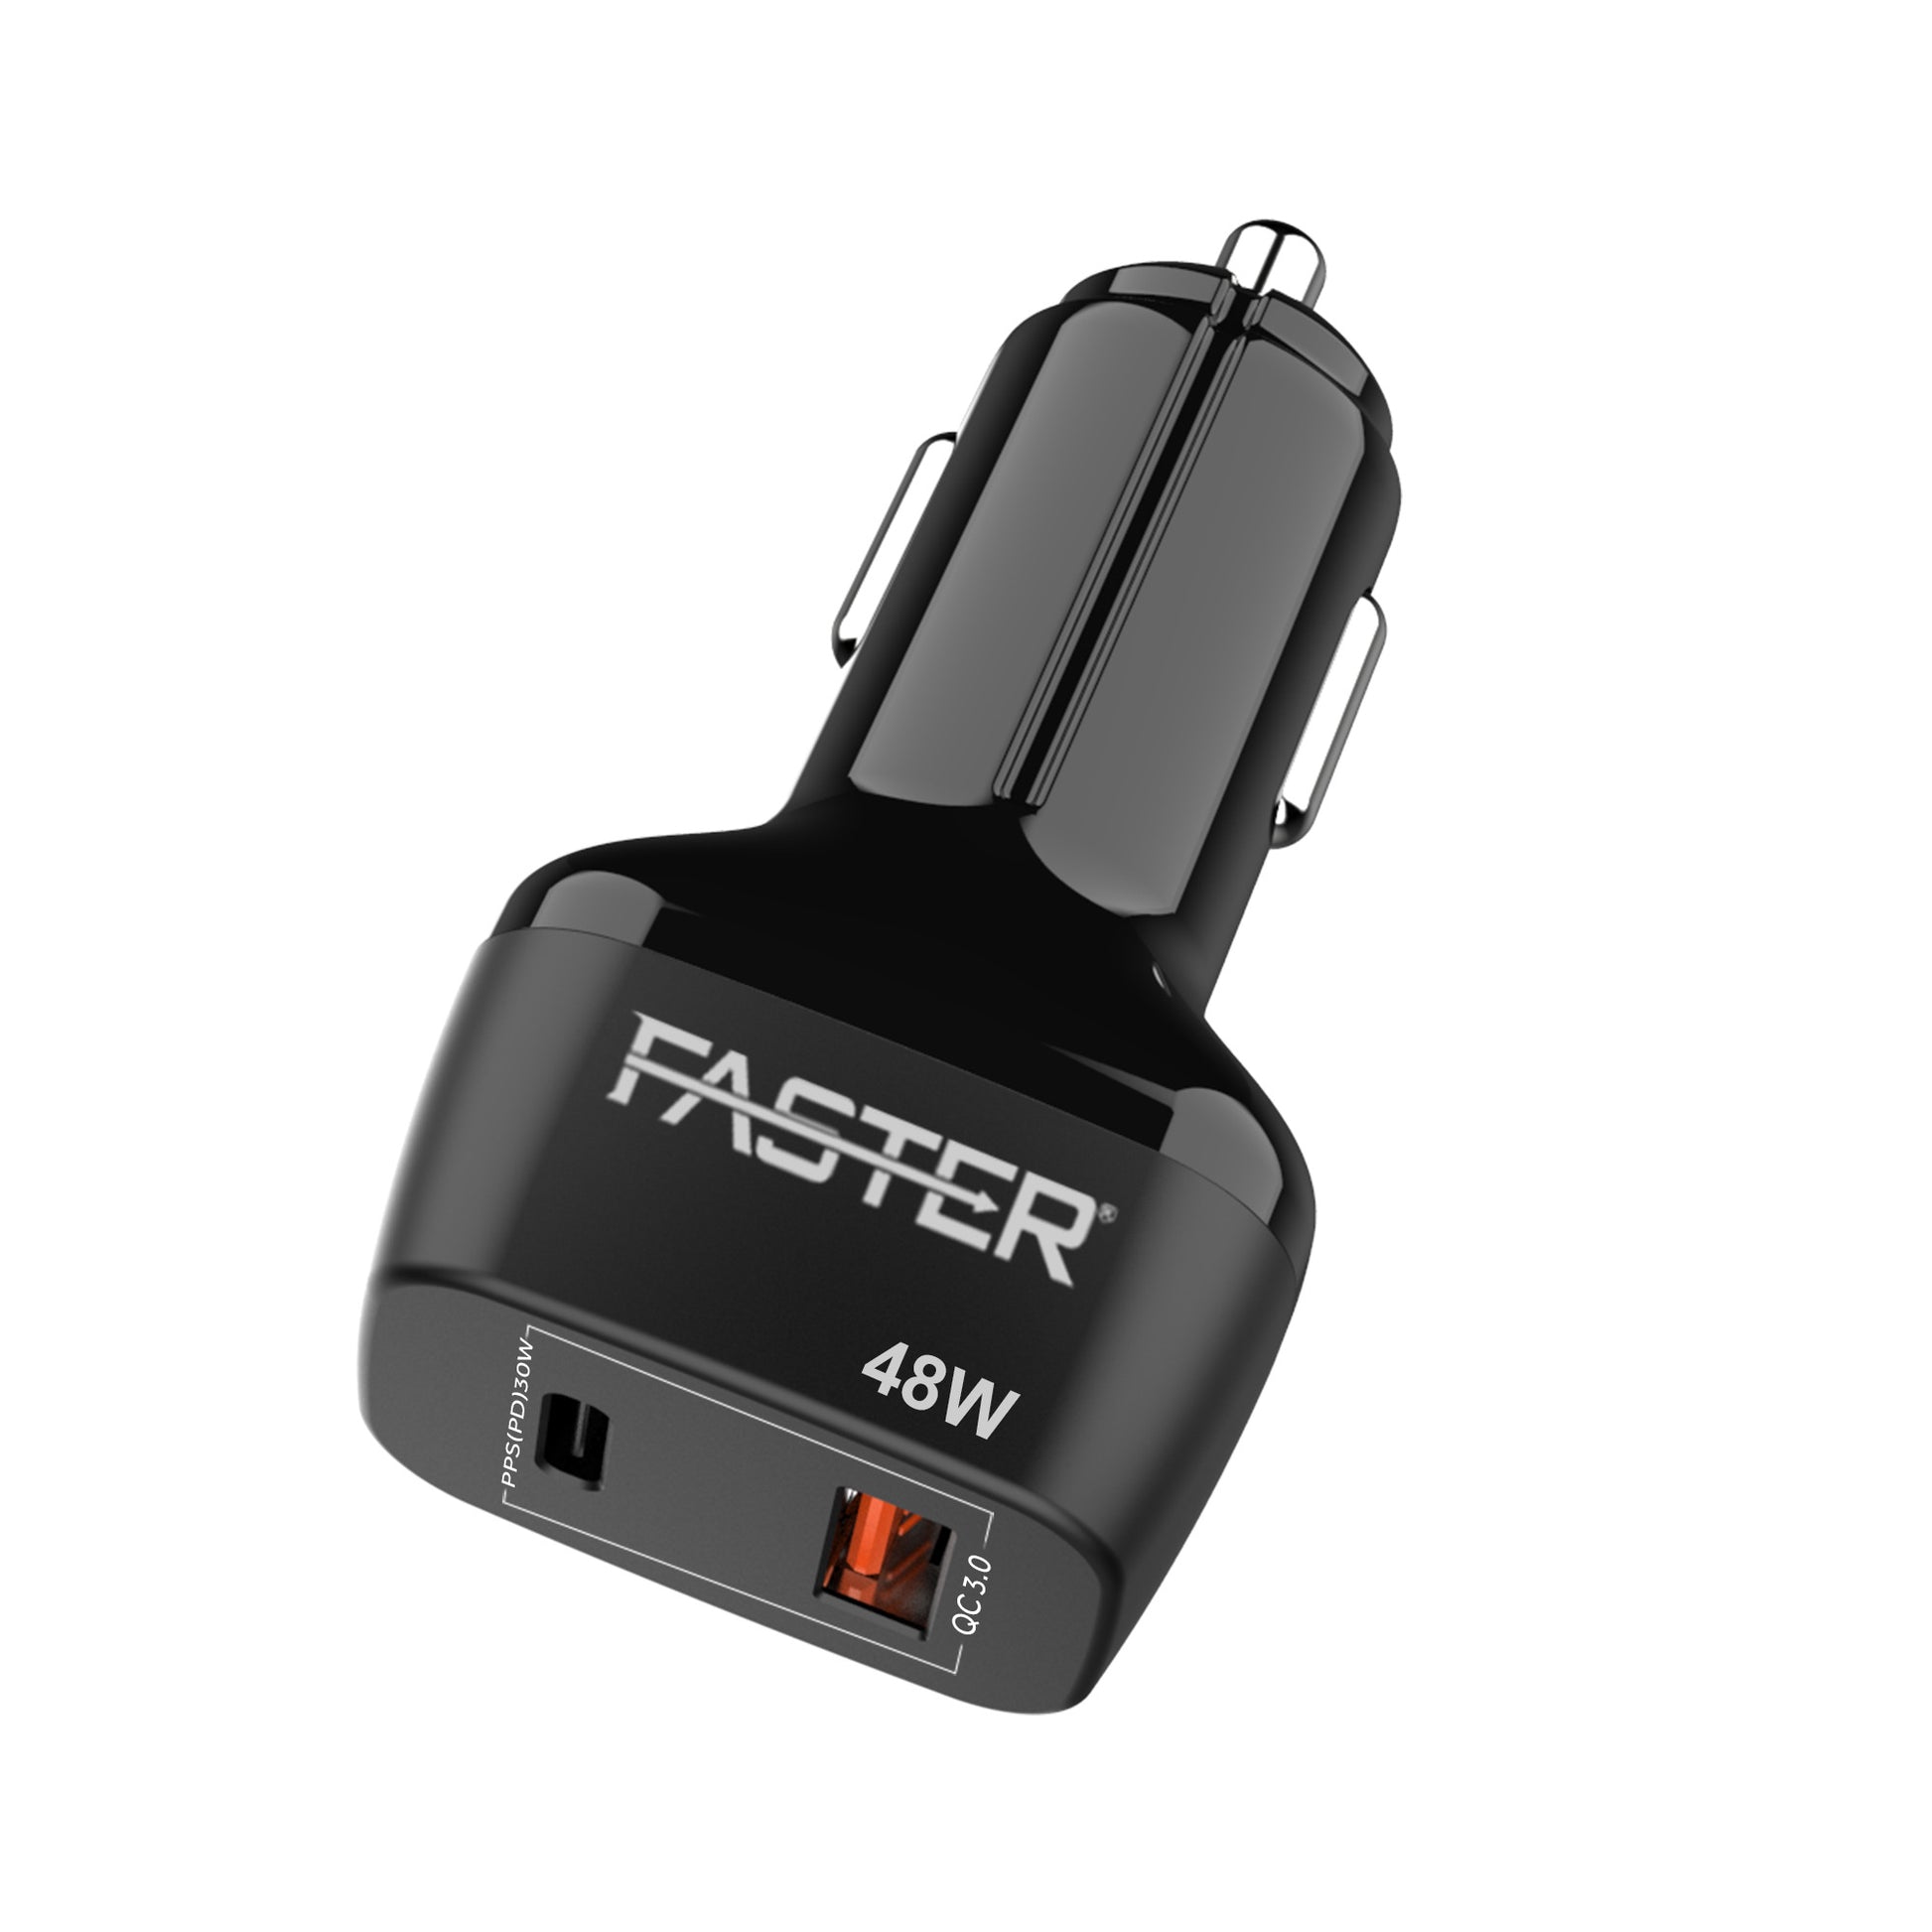 Faster Fast Car Charger Price in Pakistan